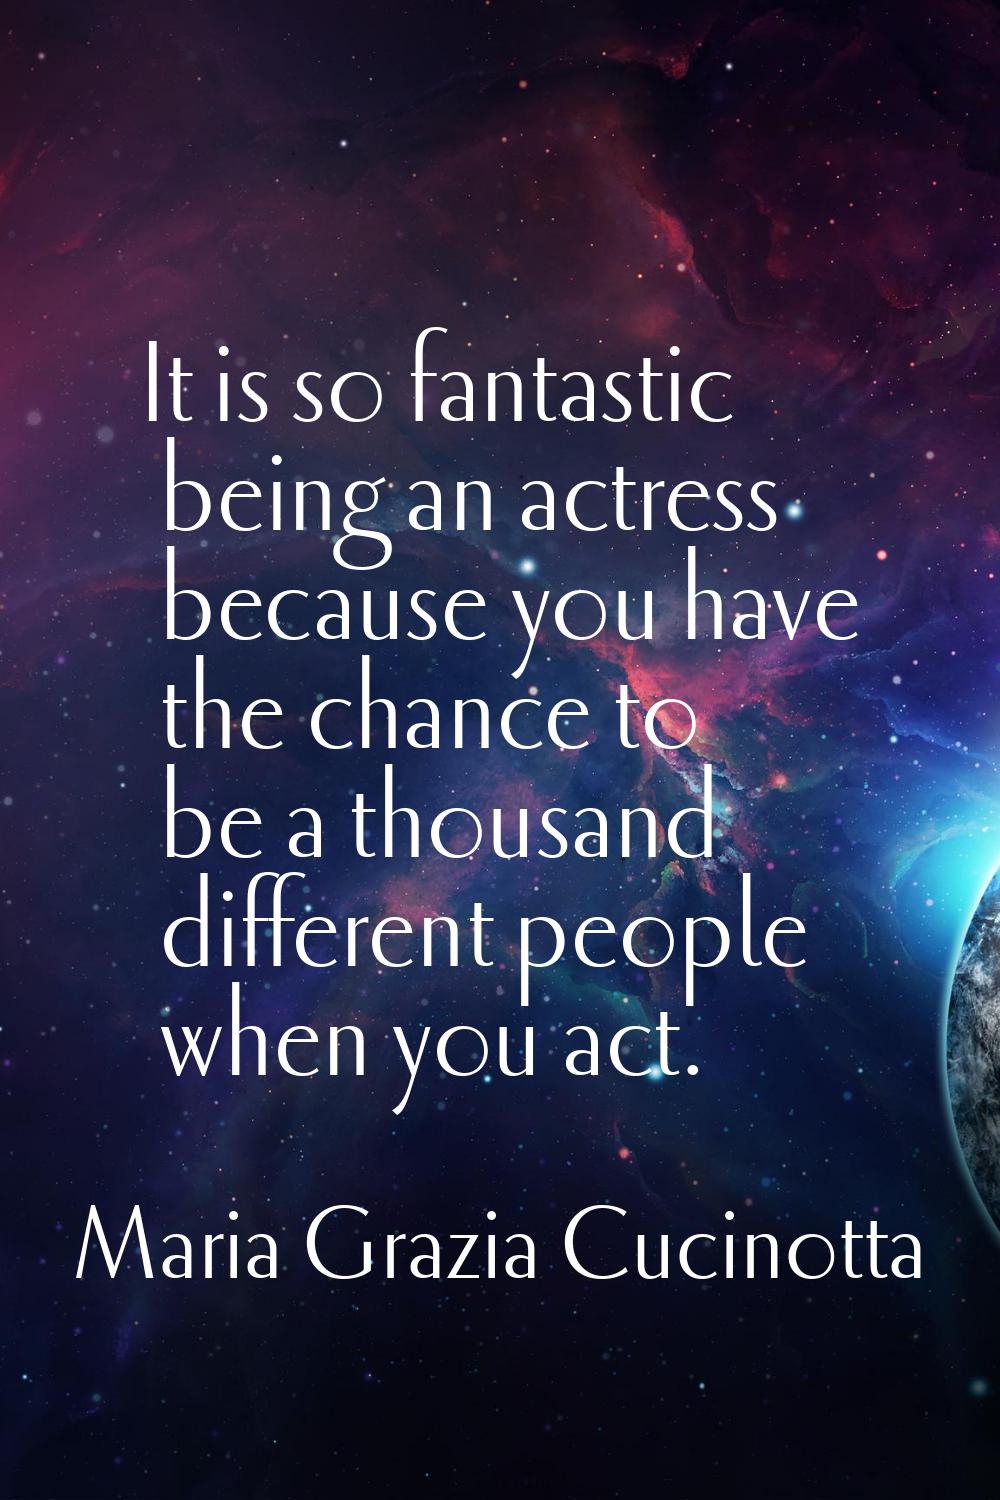 It is so fantastic being an actress because you have the chance to be a thousand different people w